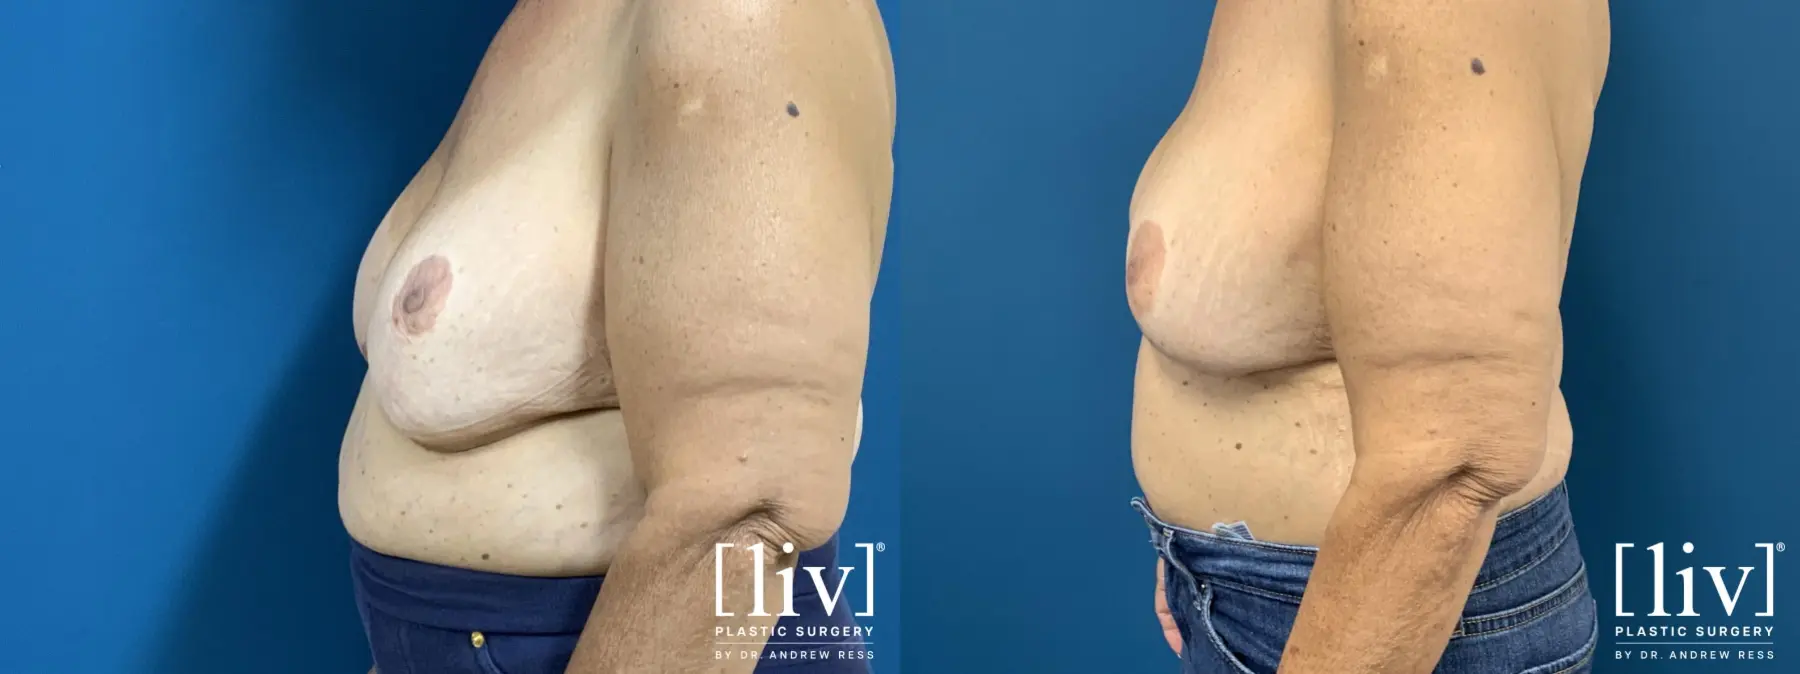 Breast Implant Exchange and Repositioning - Before and After 3